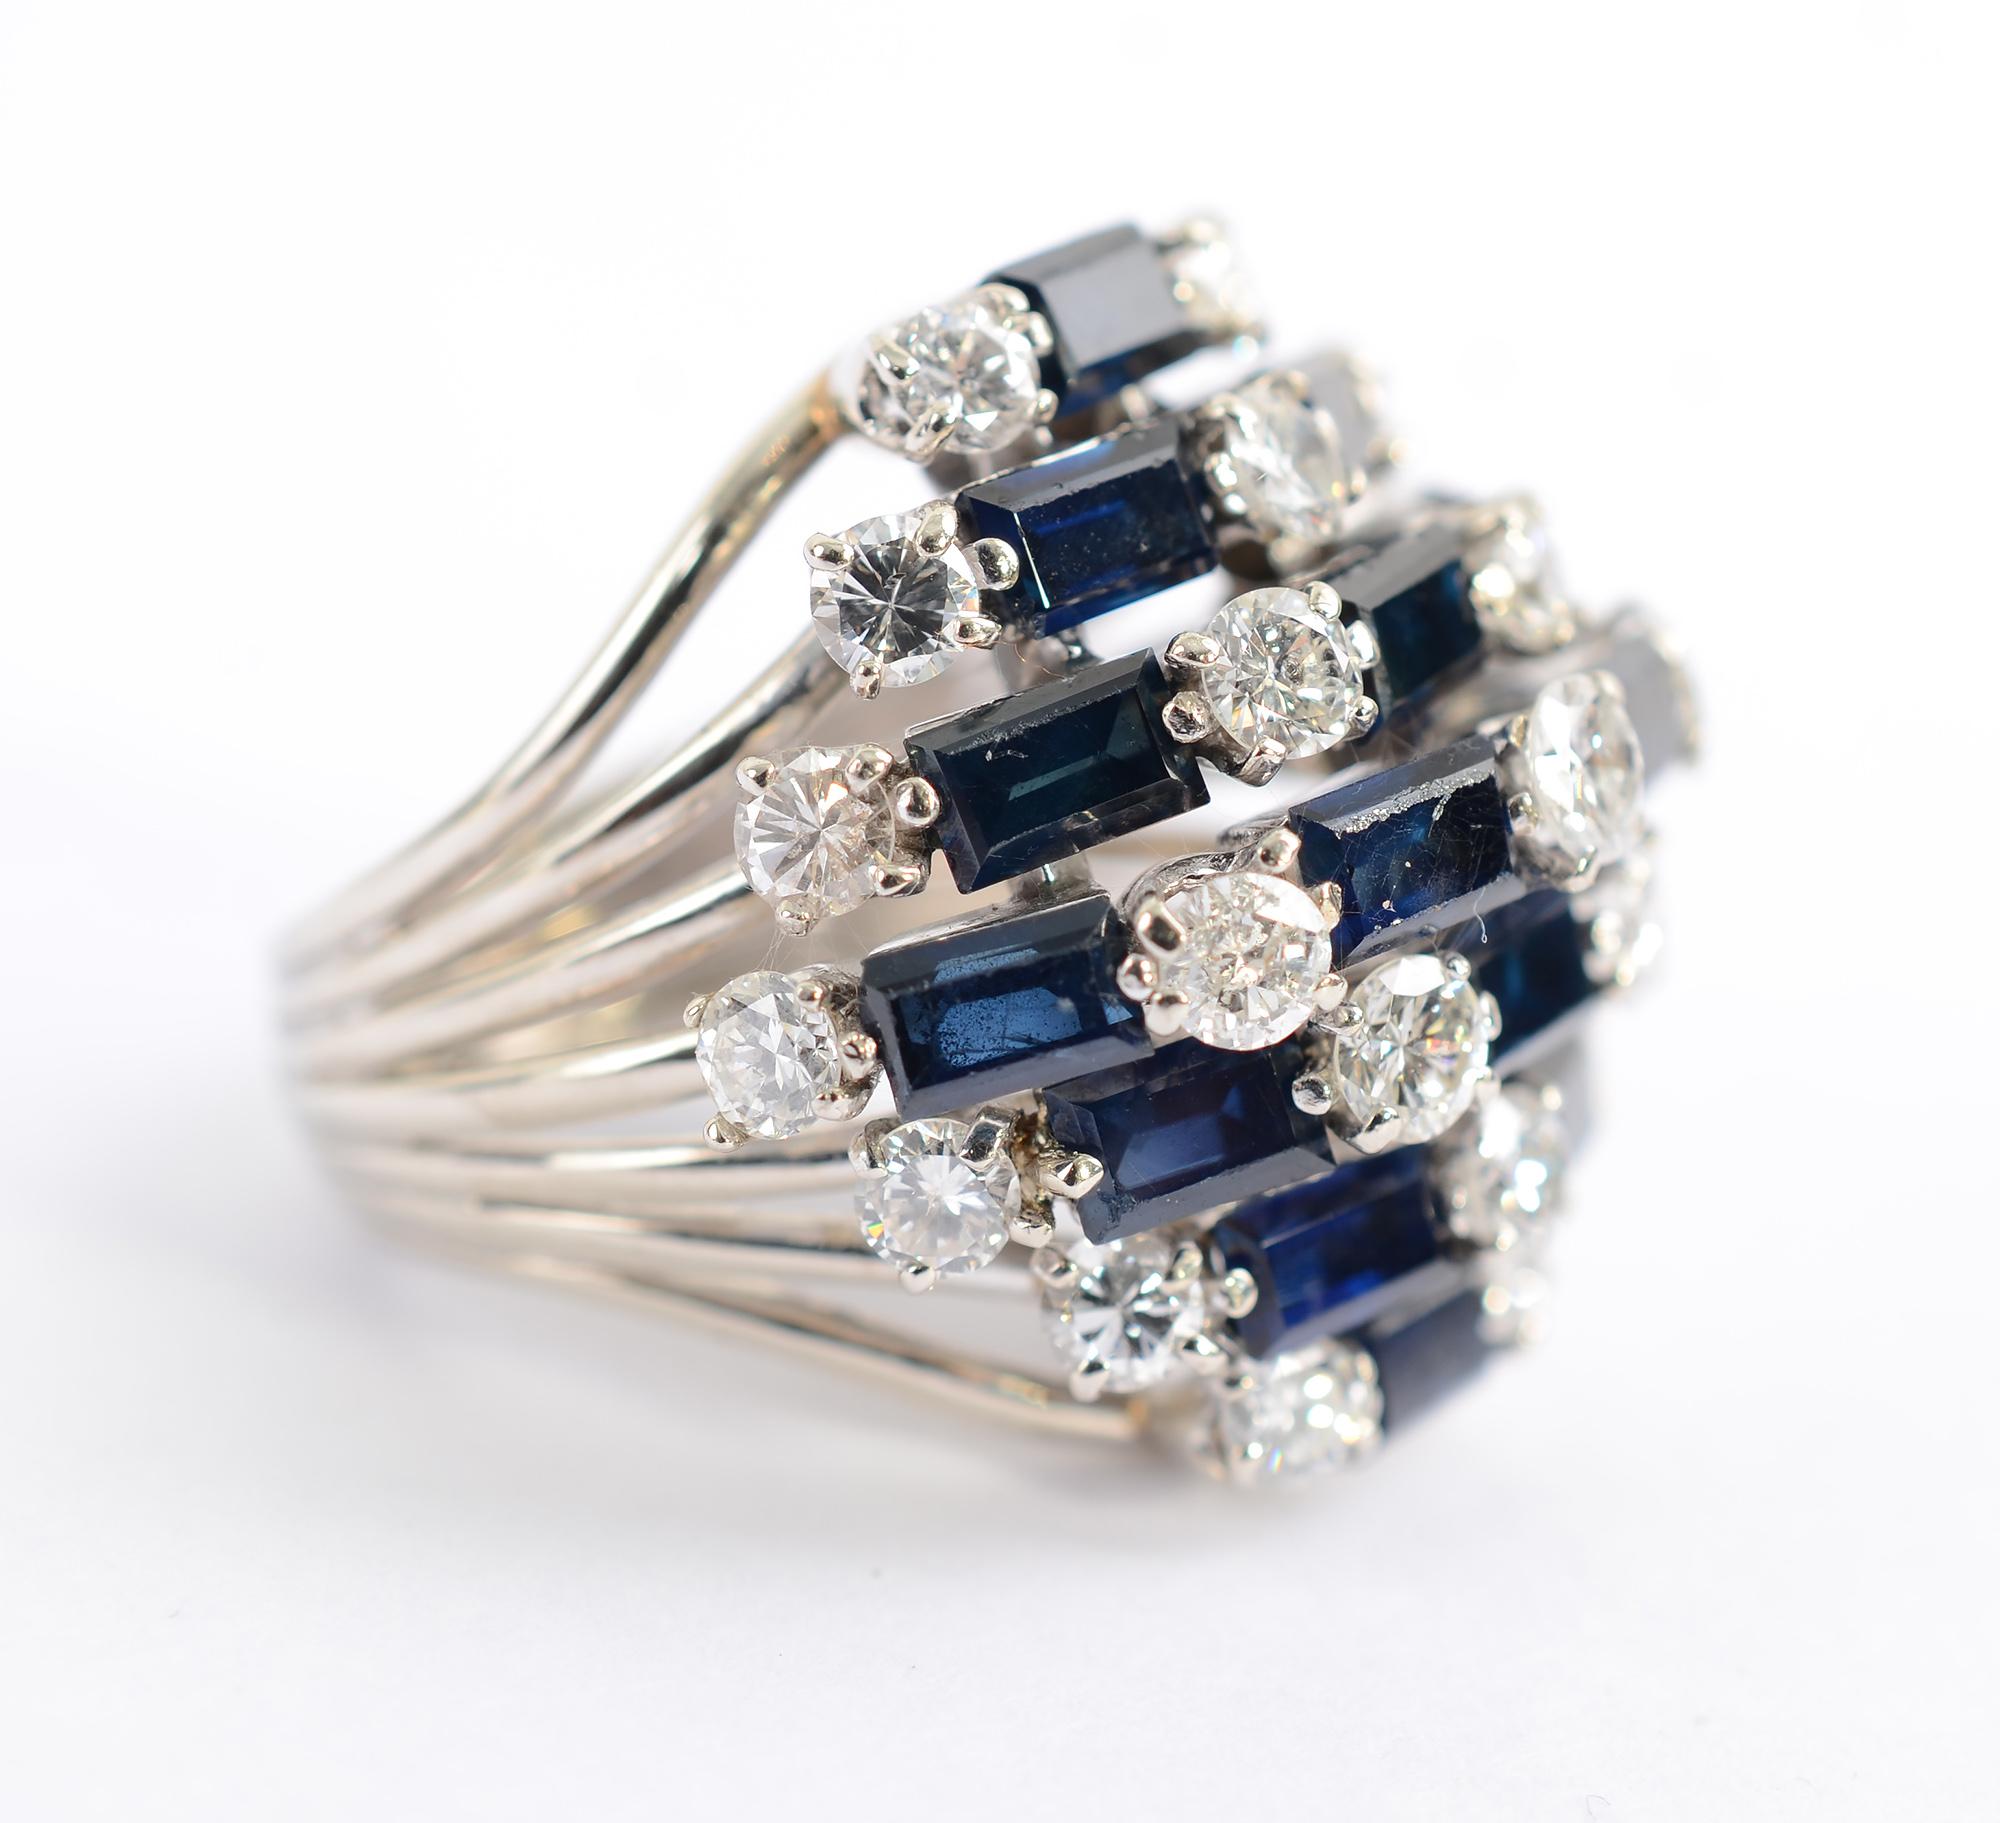 This stunning sapphire and diamond cluster cocktail ring was made in the 1950’s but  is timeless in design. It is made of 16 deep blue rectangular sapphires for a total of approximately 3 carats. The 23 round diamonds weigh approximately 4 carats.